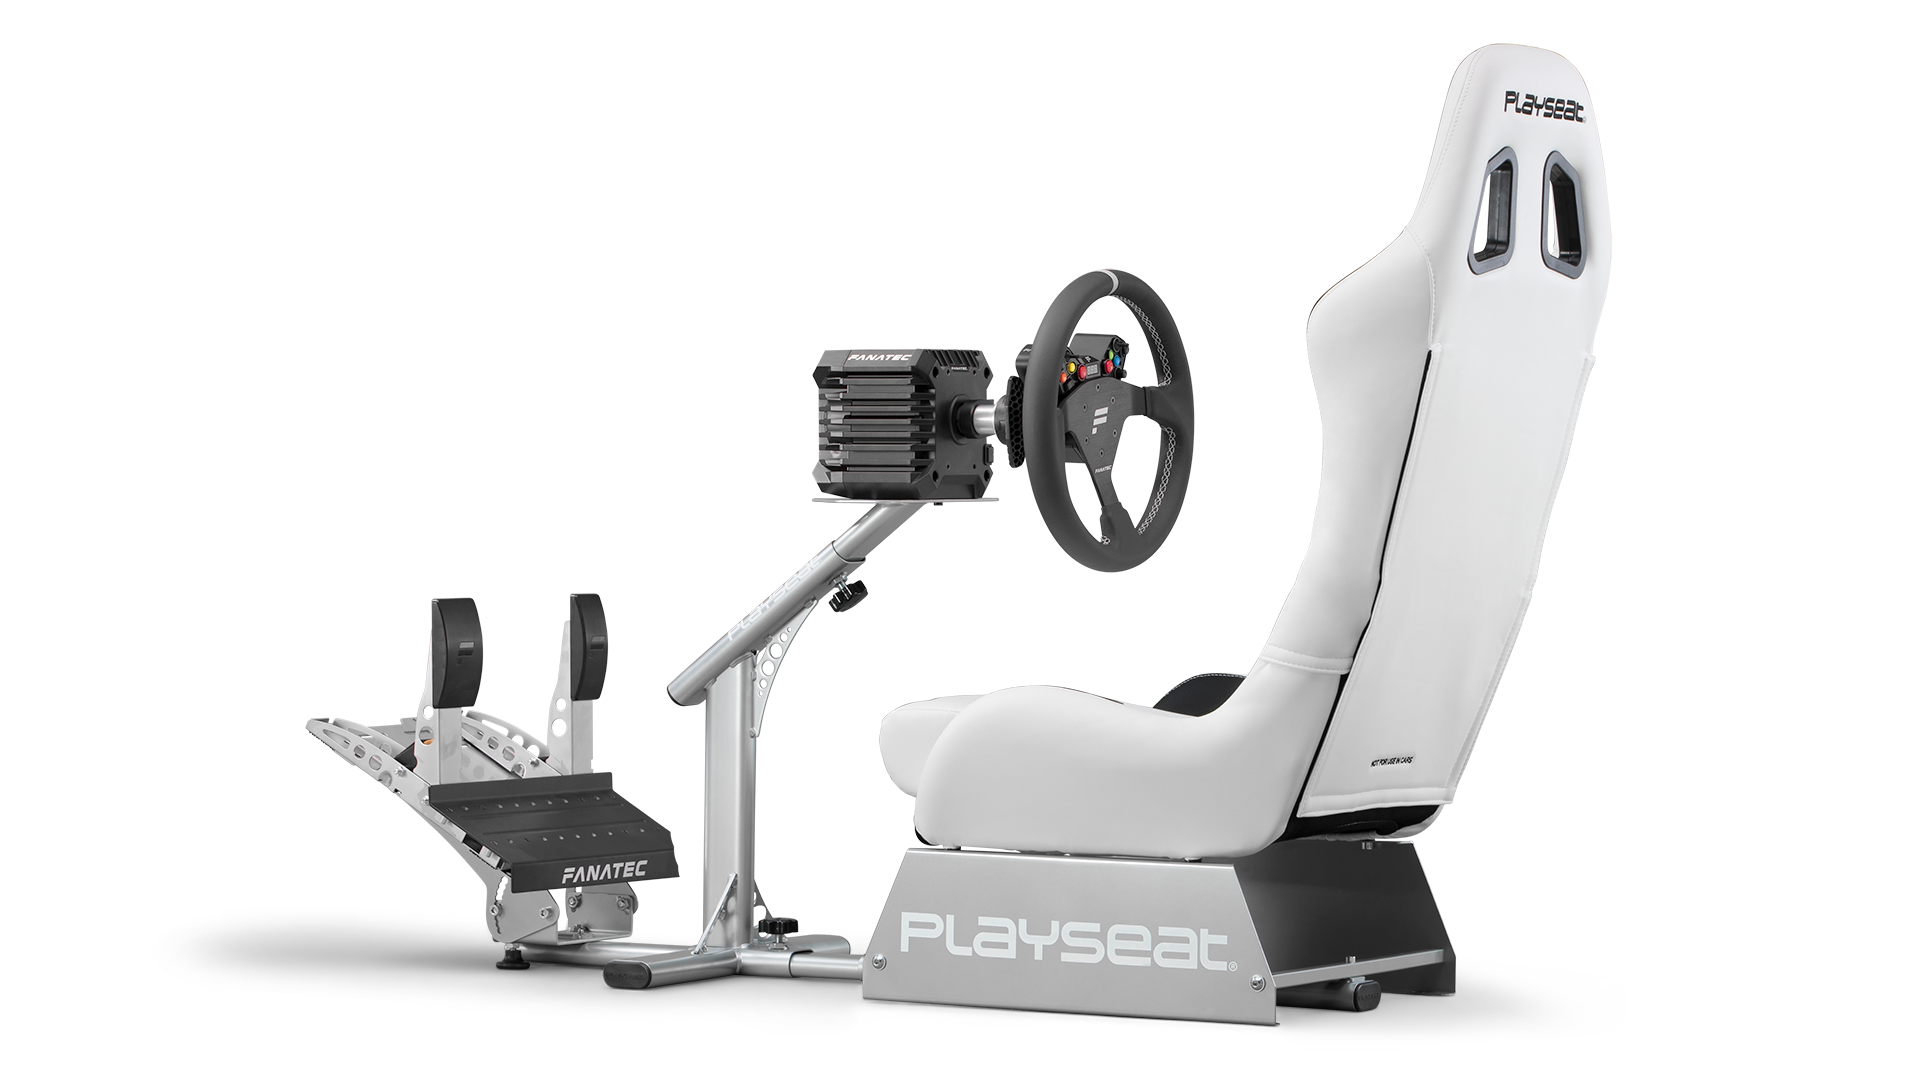 playseat-evolution-white-racing-simulator-back-angle-view-fanatec-1920x1080-2.png